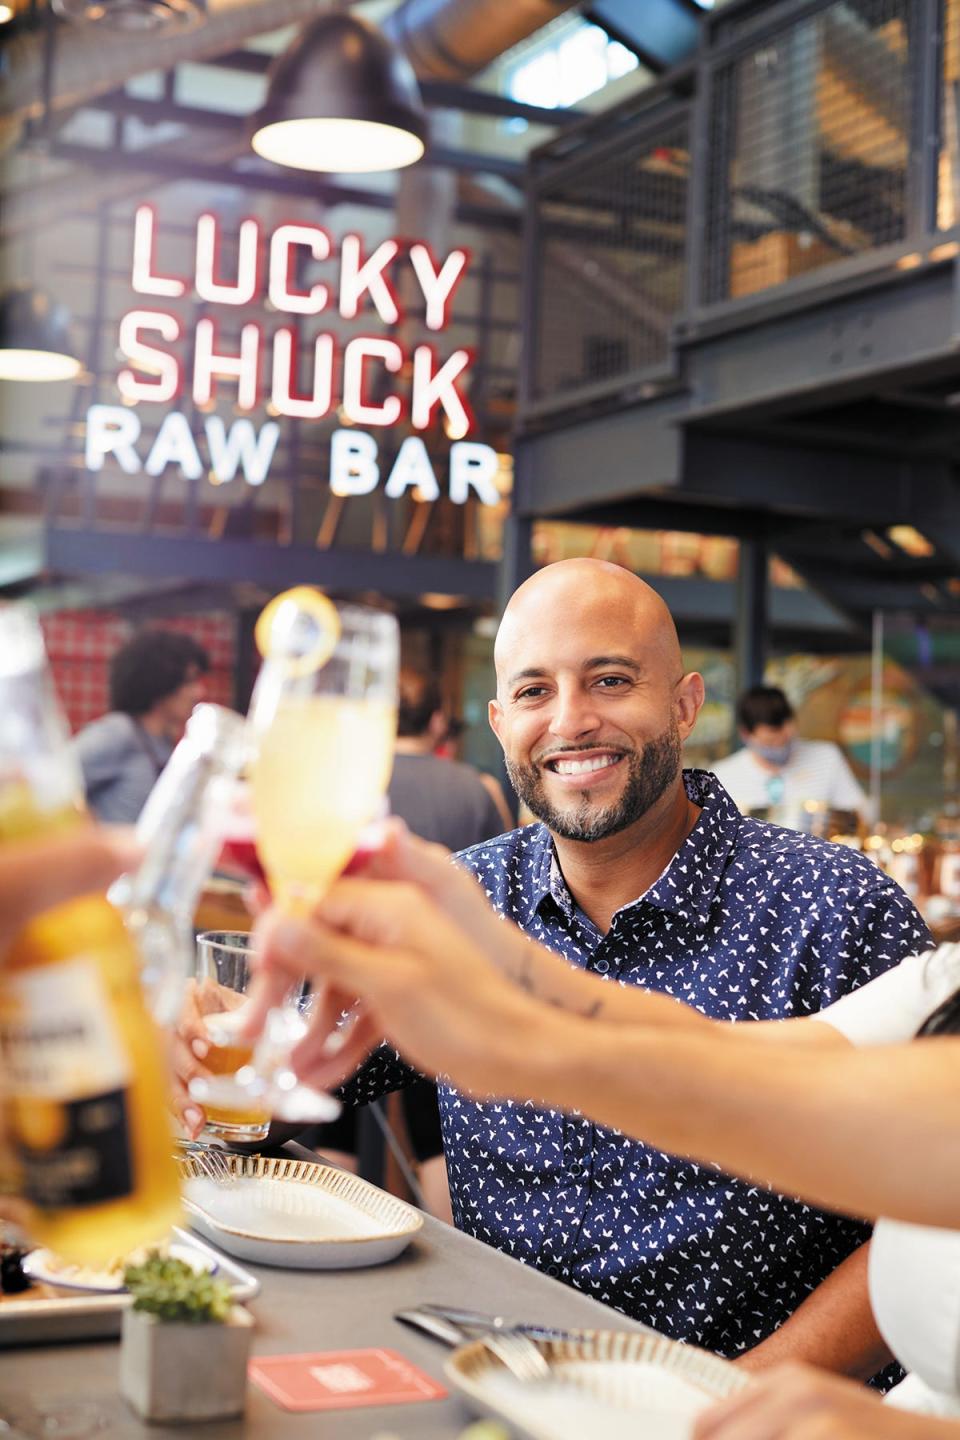 Cheer on your team and enjoy plenty of food and beverage specials at Lucky Shuck in Jupiter during Super Bowl LVIII.